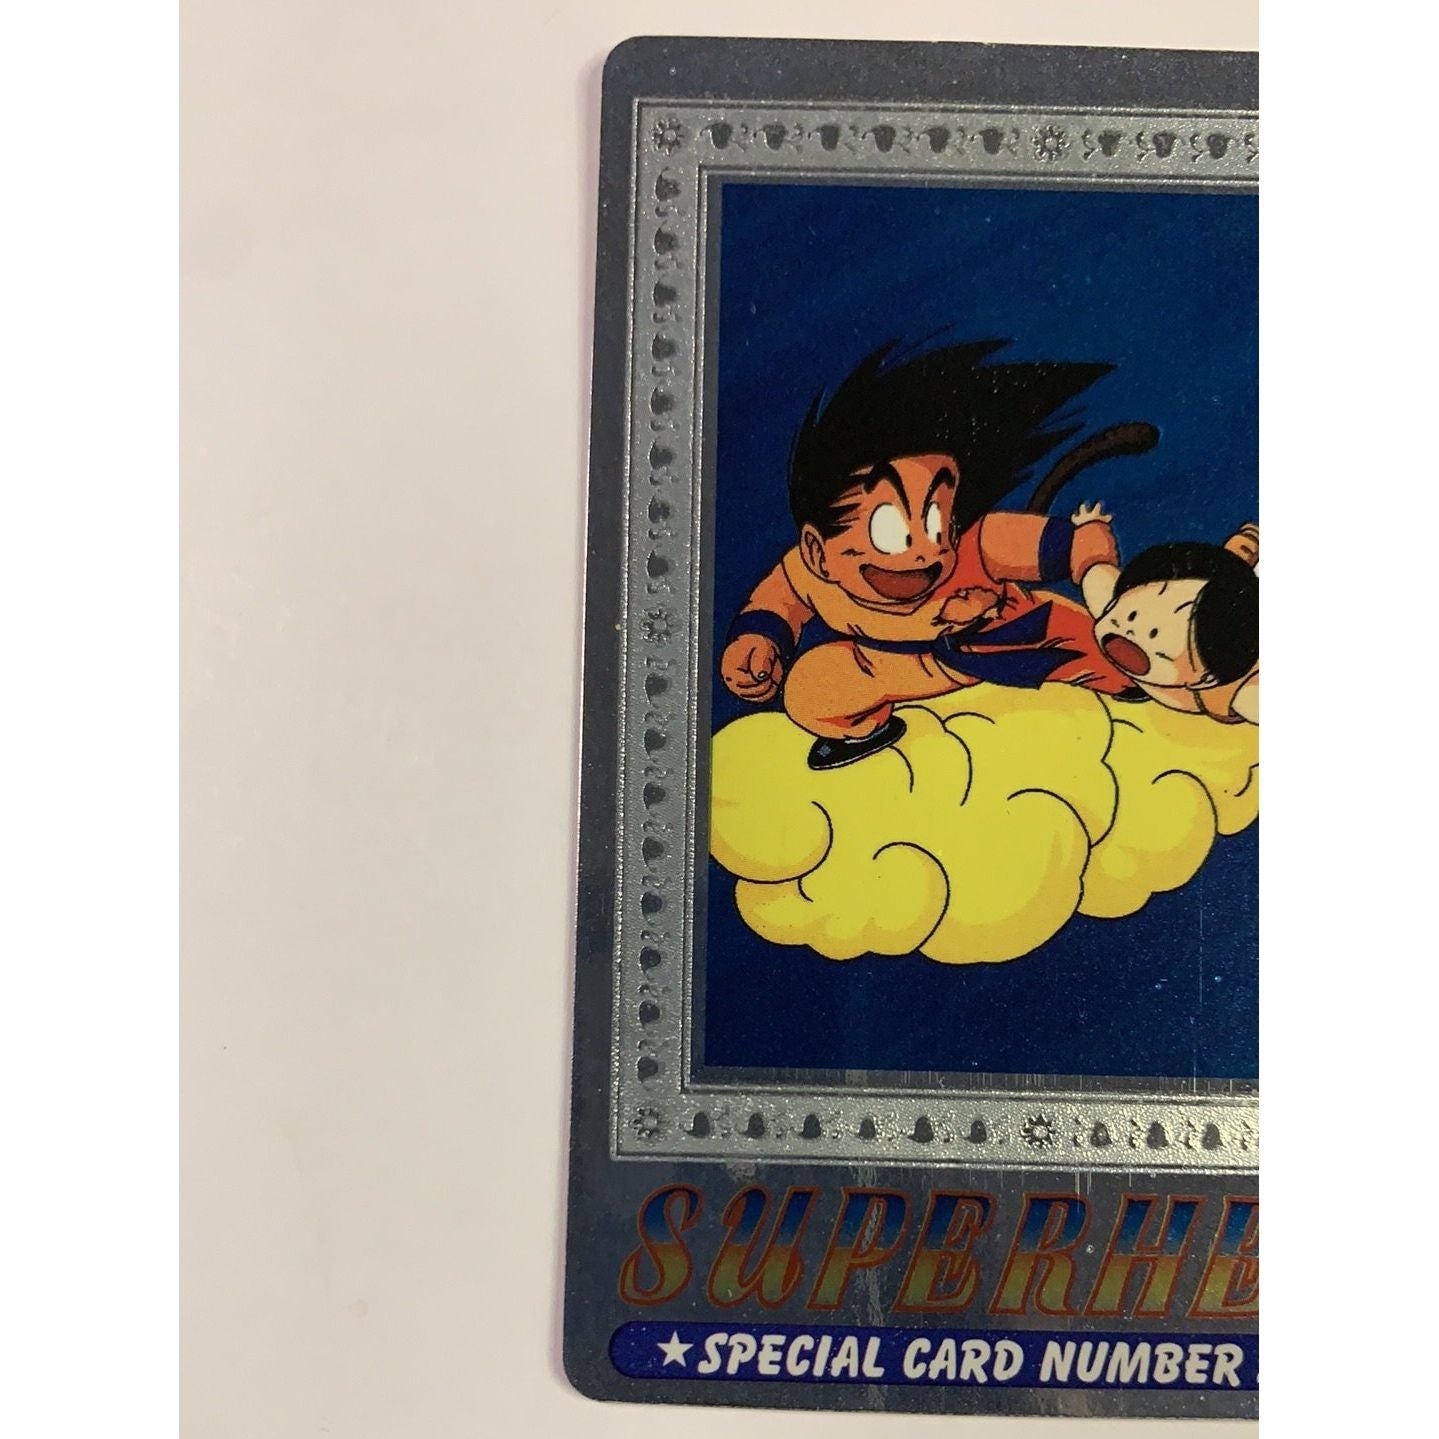  1995 Cardass Adali Super Hero Special Card S-122 Silver Foil Goku & Flying Nimbus  Local Legends Cards & Collectibles